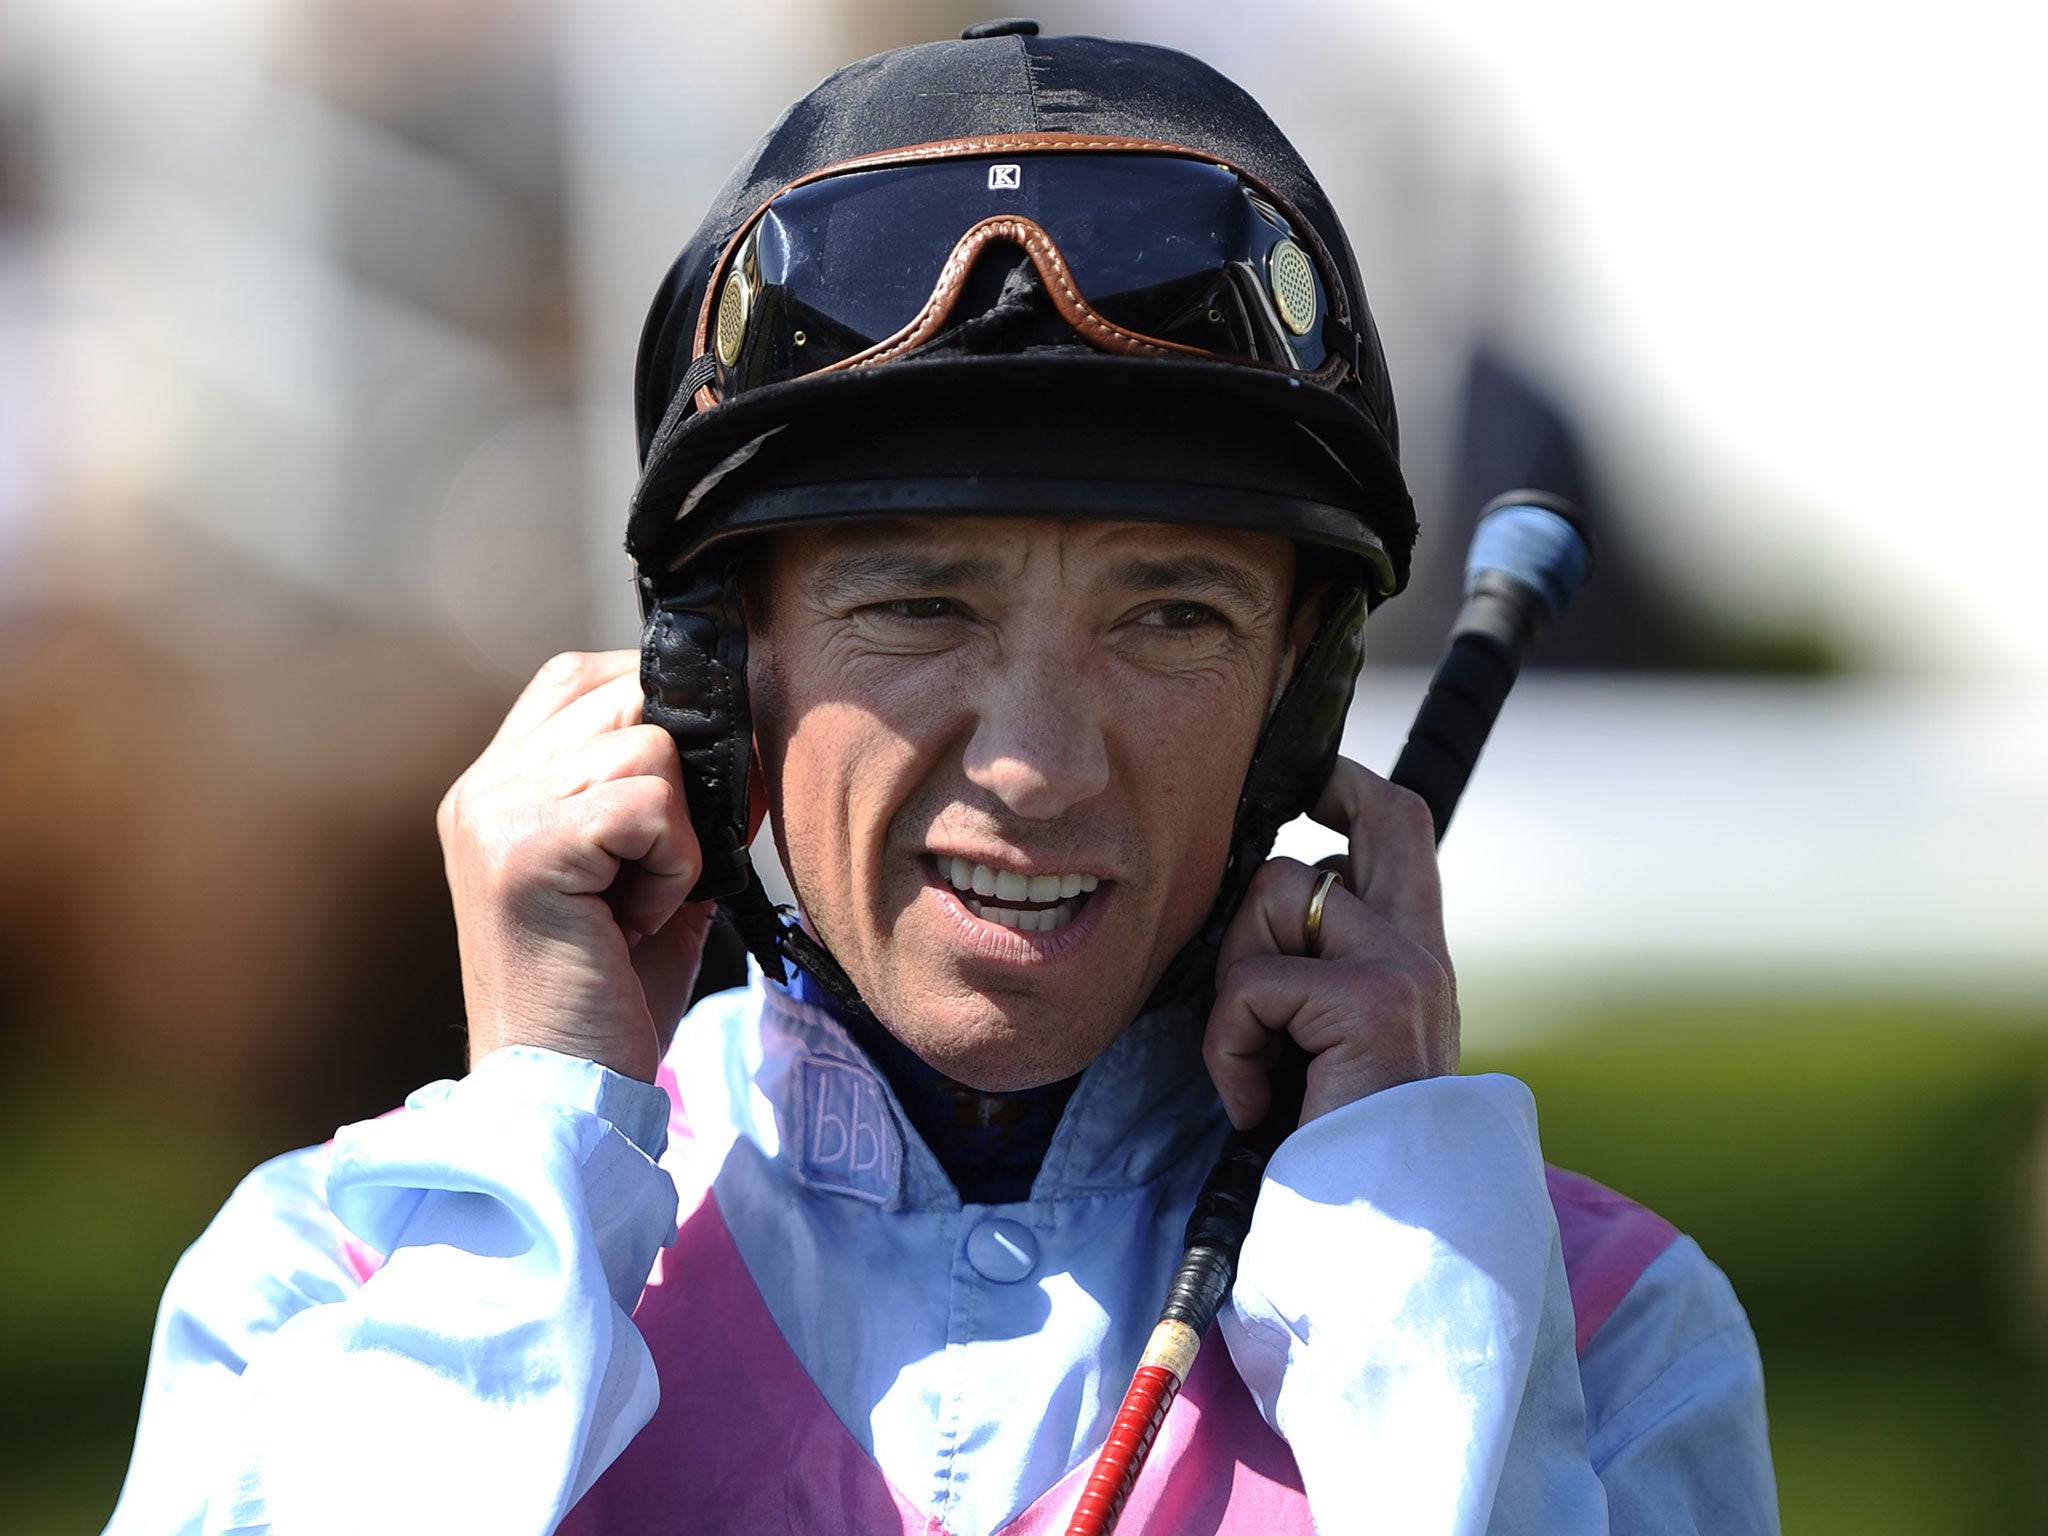 Frankie Dettori may not return in time for the Epsom Classics